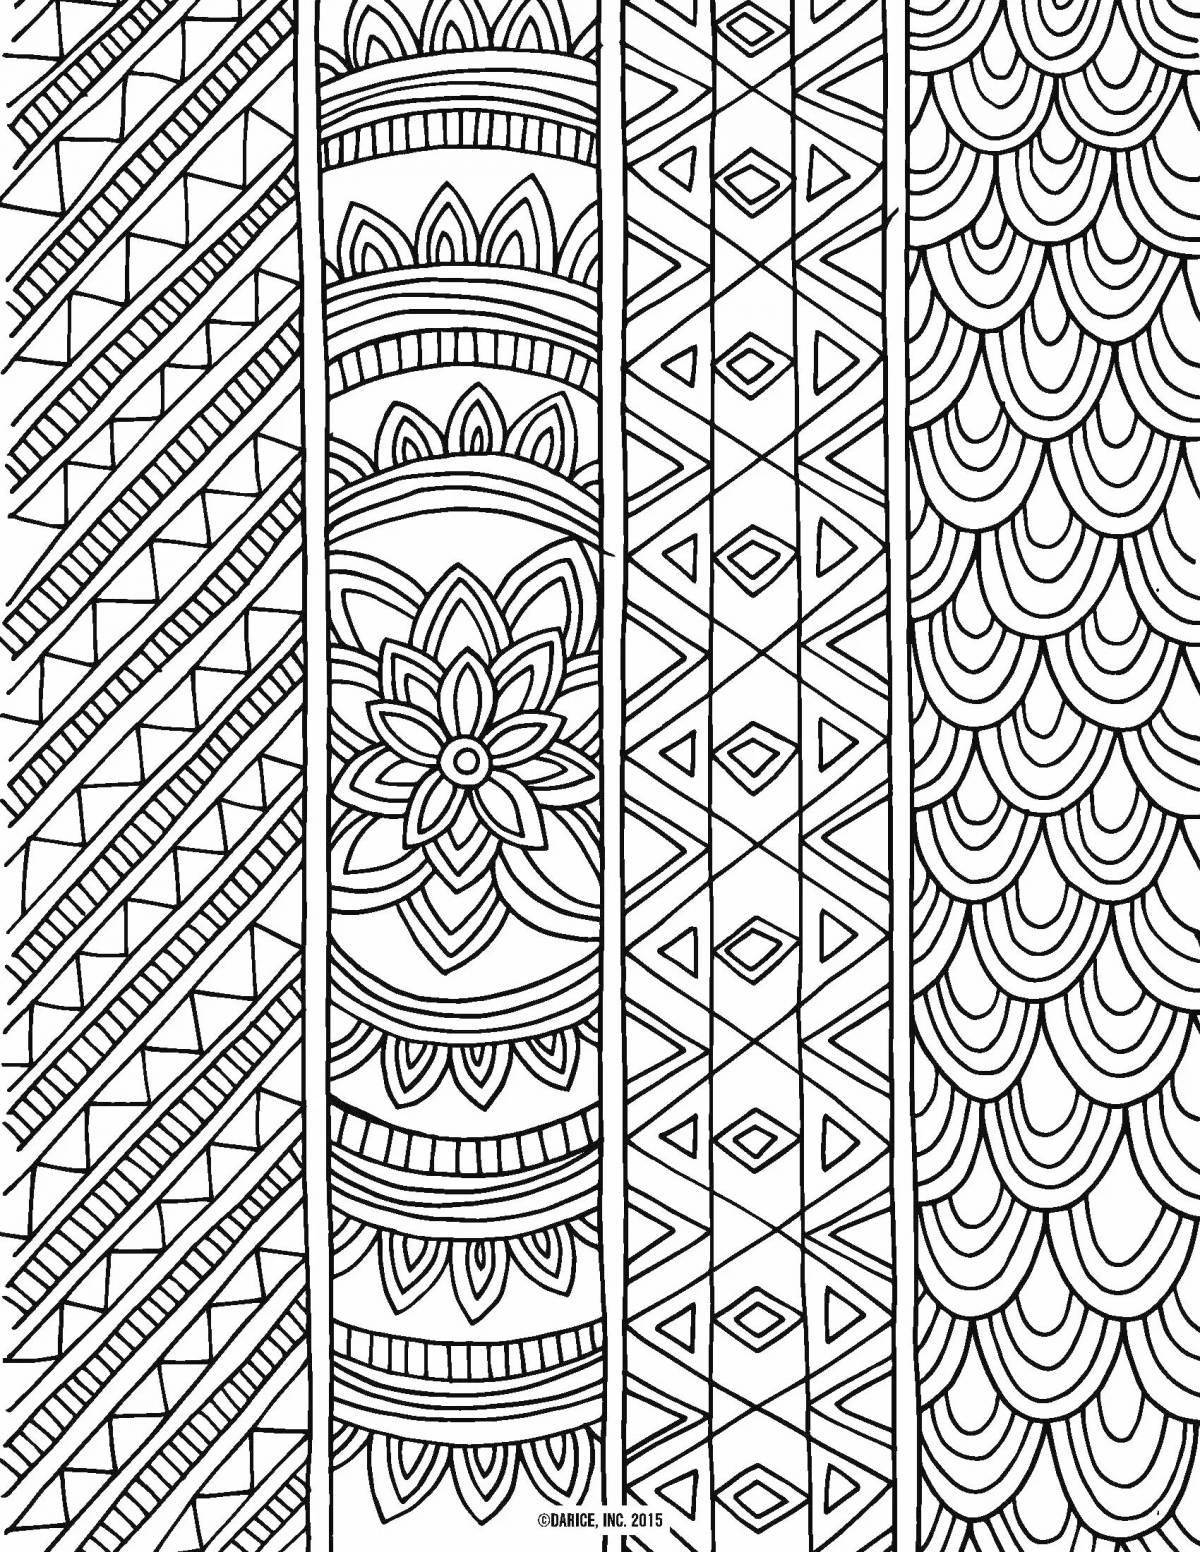 Coloring page with a fascinating light pattern